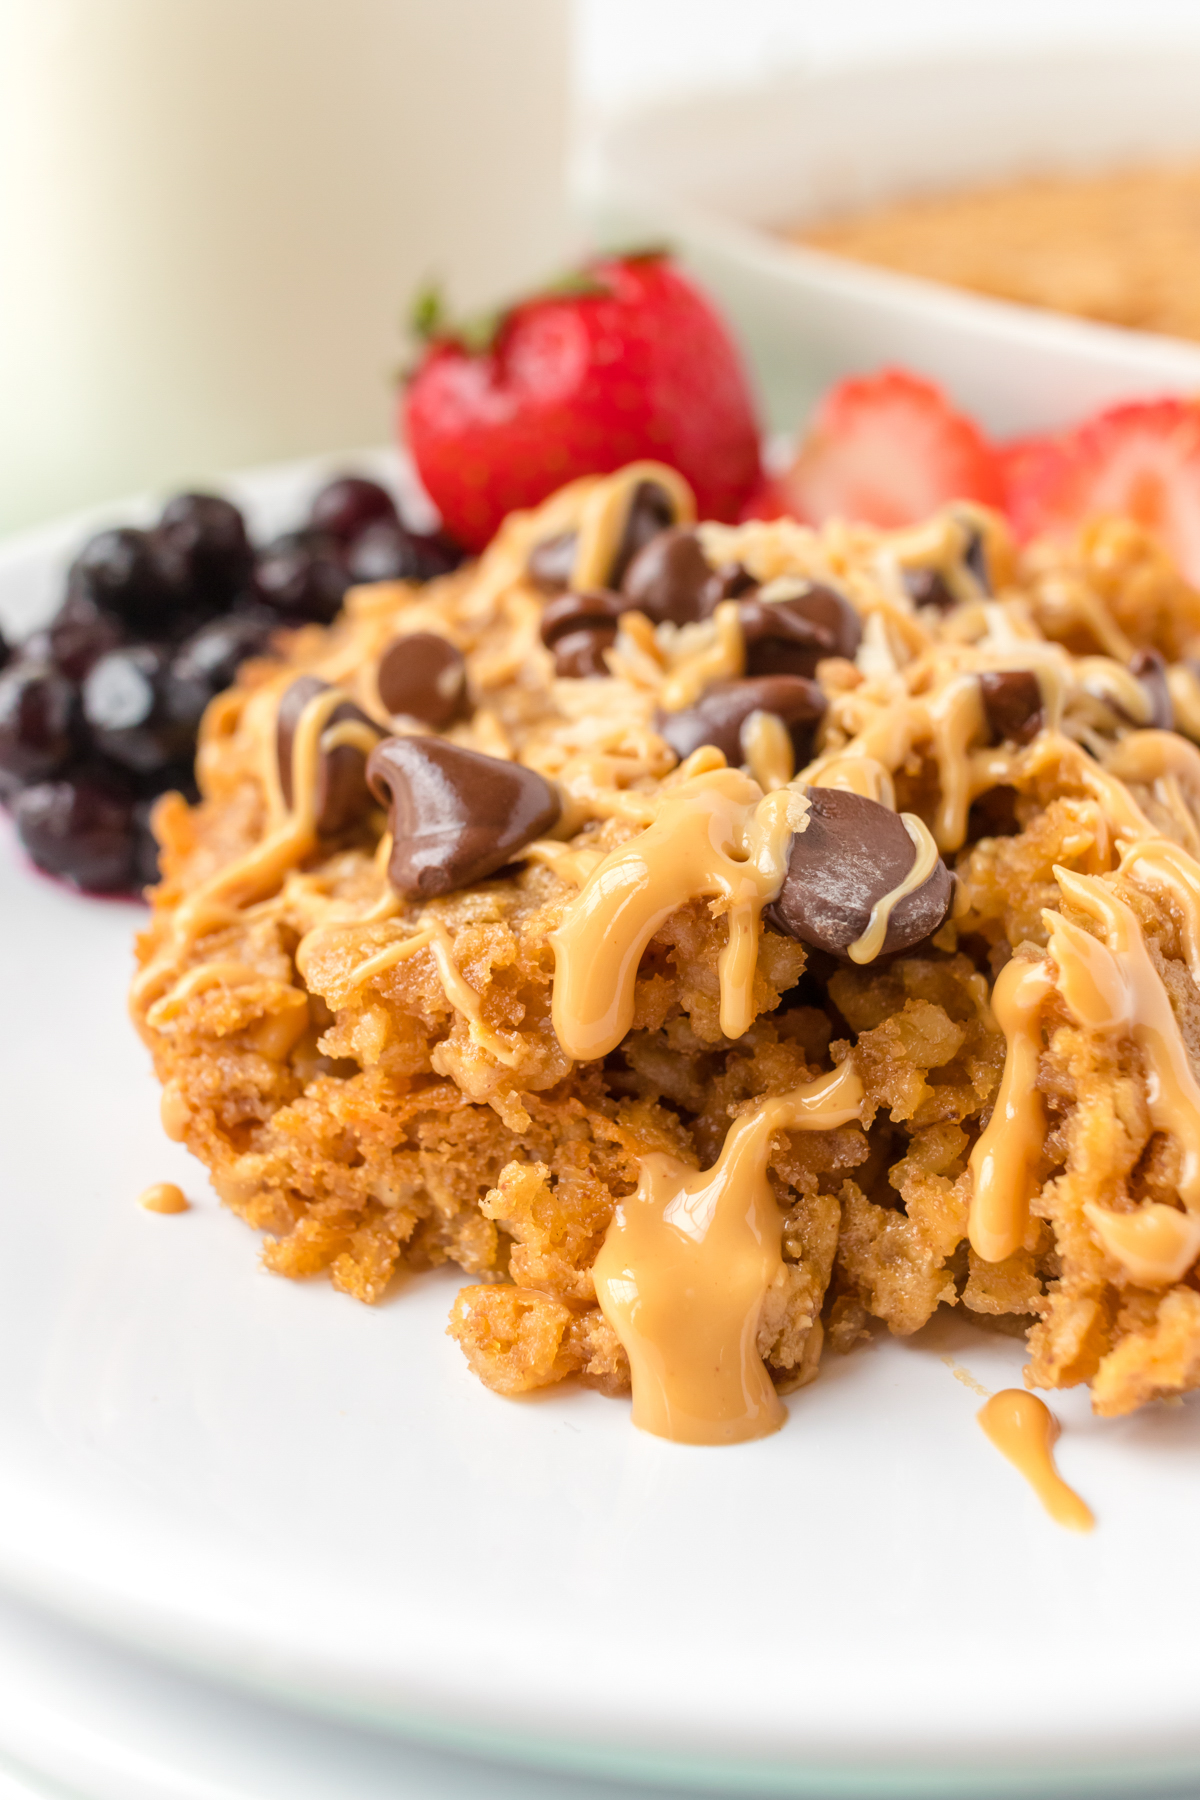 Baked oatmeal with warm drizzled peanut butter and chocolate chips.